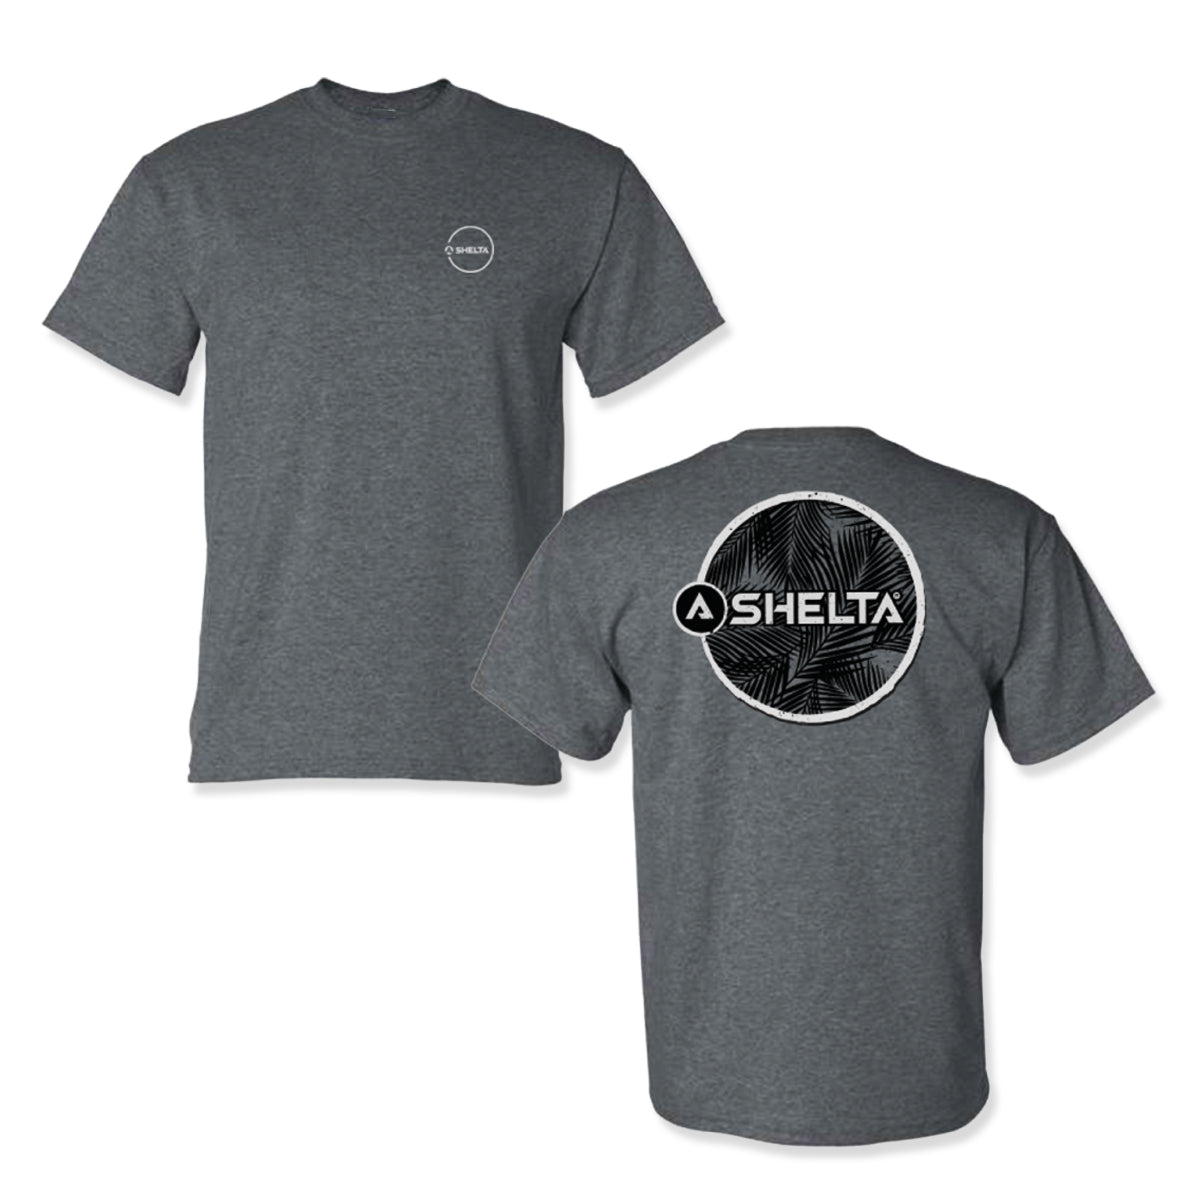 Palm Logo in Charcoal Heater. This heavy-duty 50/50 T-Shirt is made to work for you. This fabric is specifically designed to wick moisture away from the body, helping to keep you dry and cool. Soft, preshrunk cotton is blended with durable, colorfast polyester for optimal quality